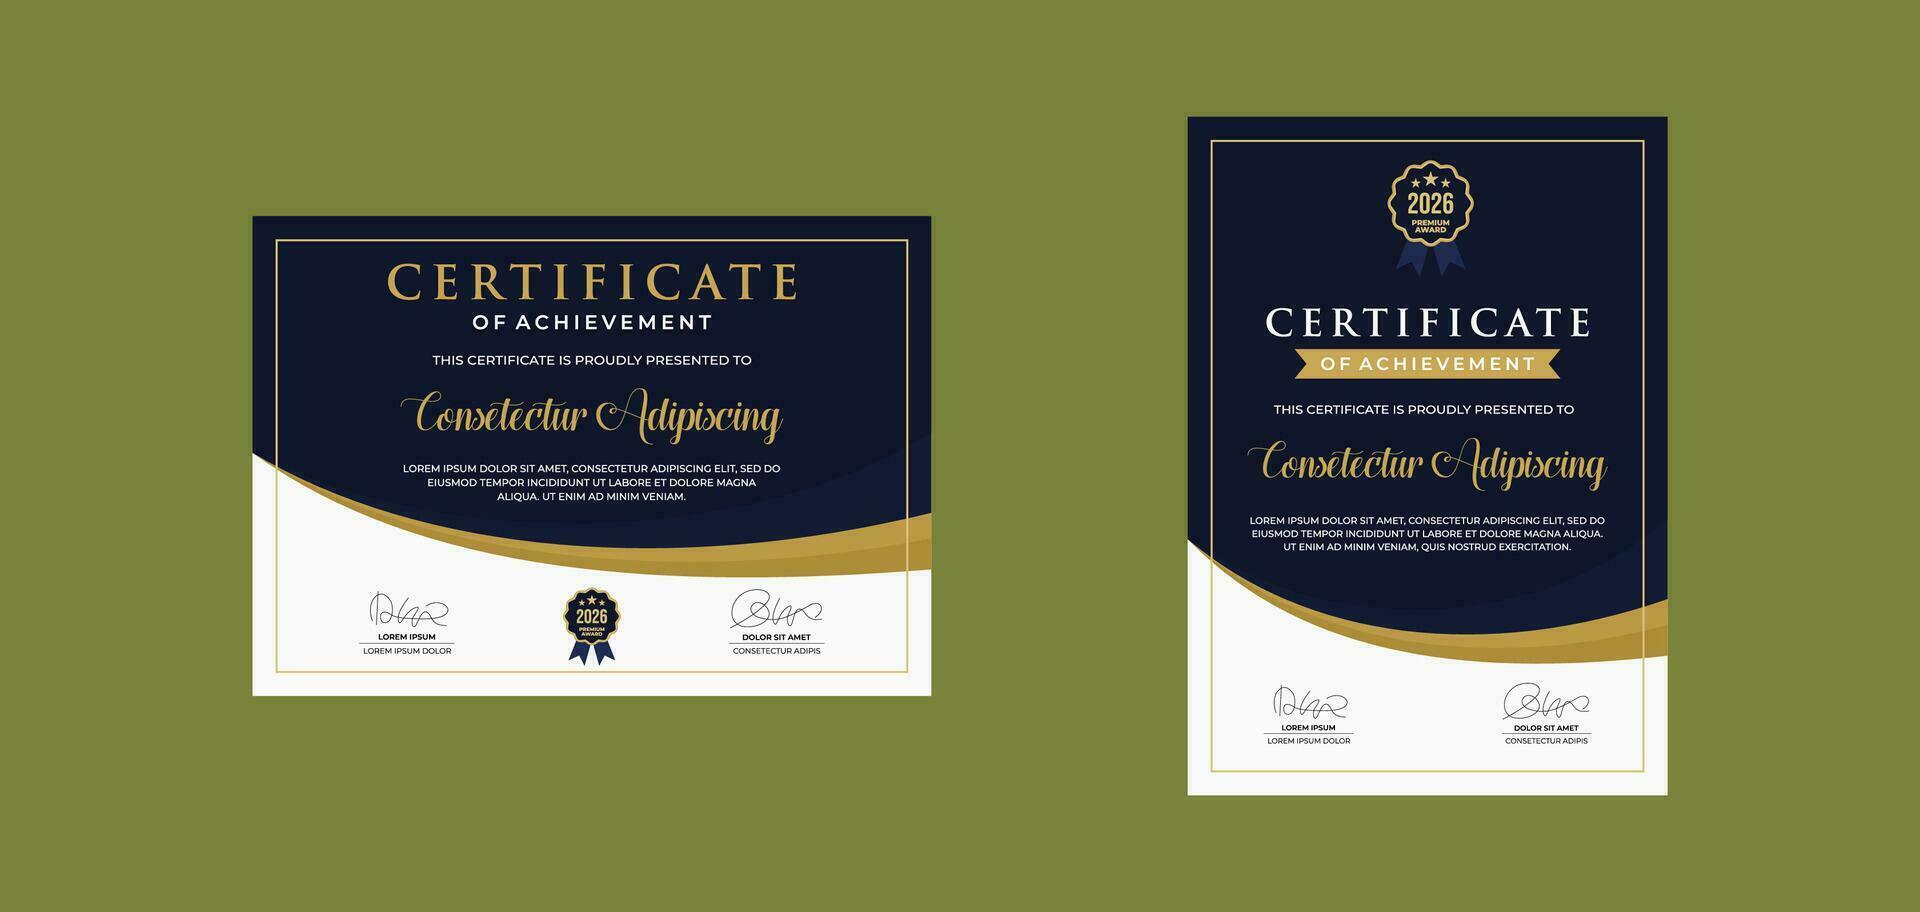 certificate template for business corporate online education vector